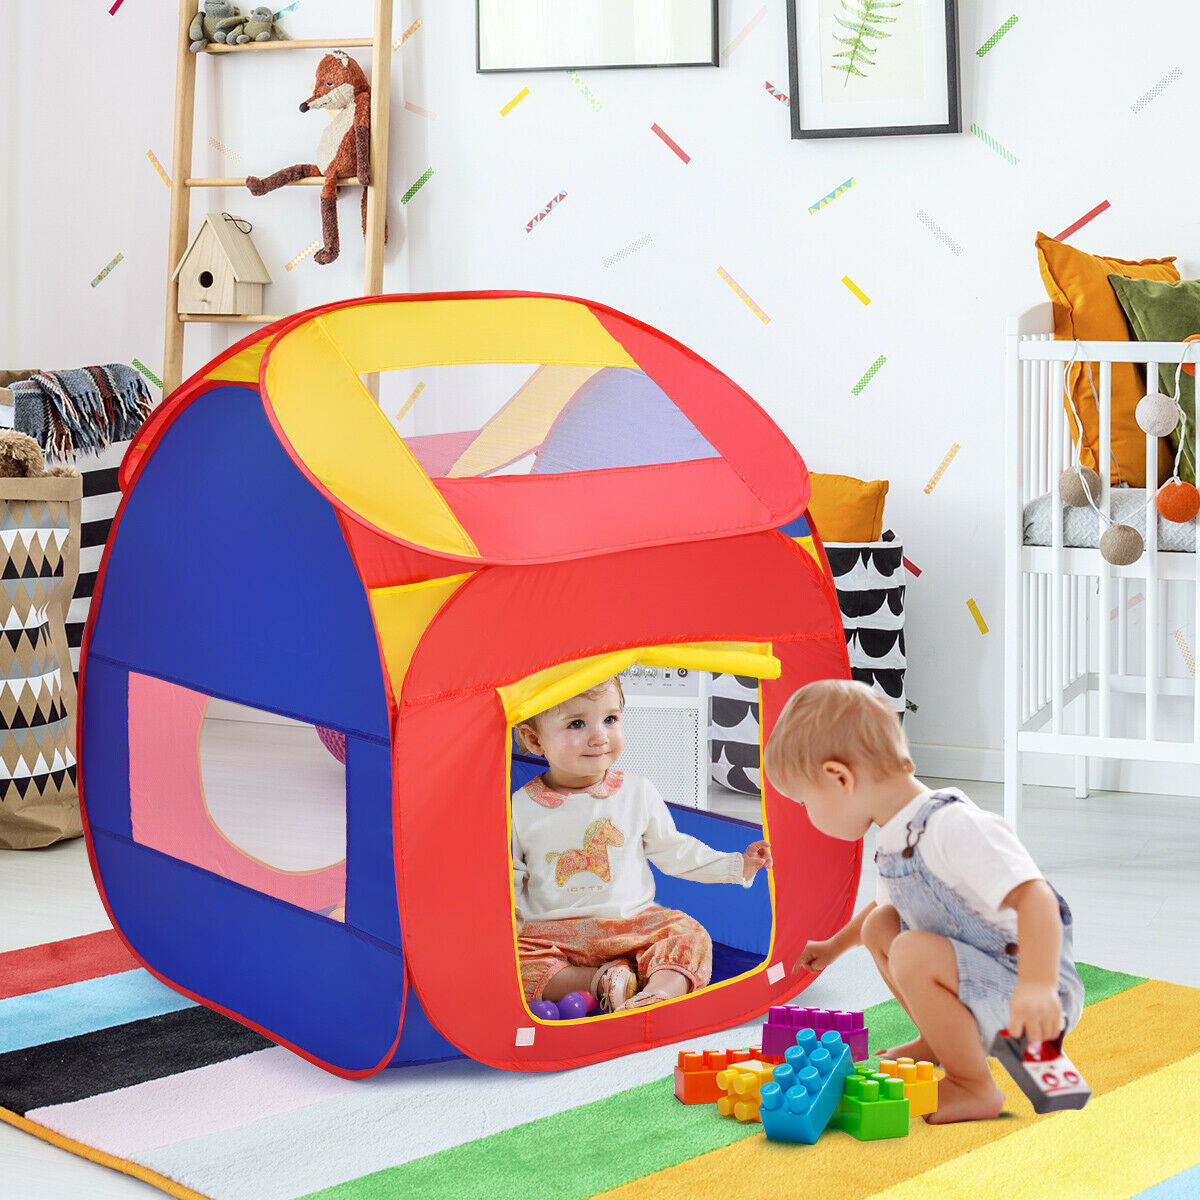 Portable Kid Play House Toy Tent with 100 Balls - Direct by Wilsons Home Store